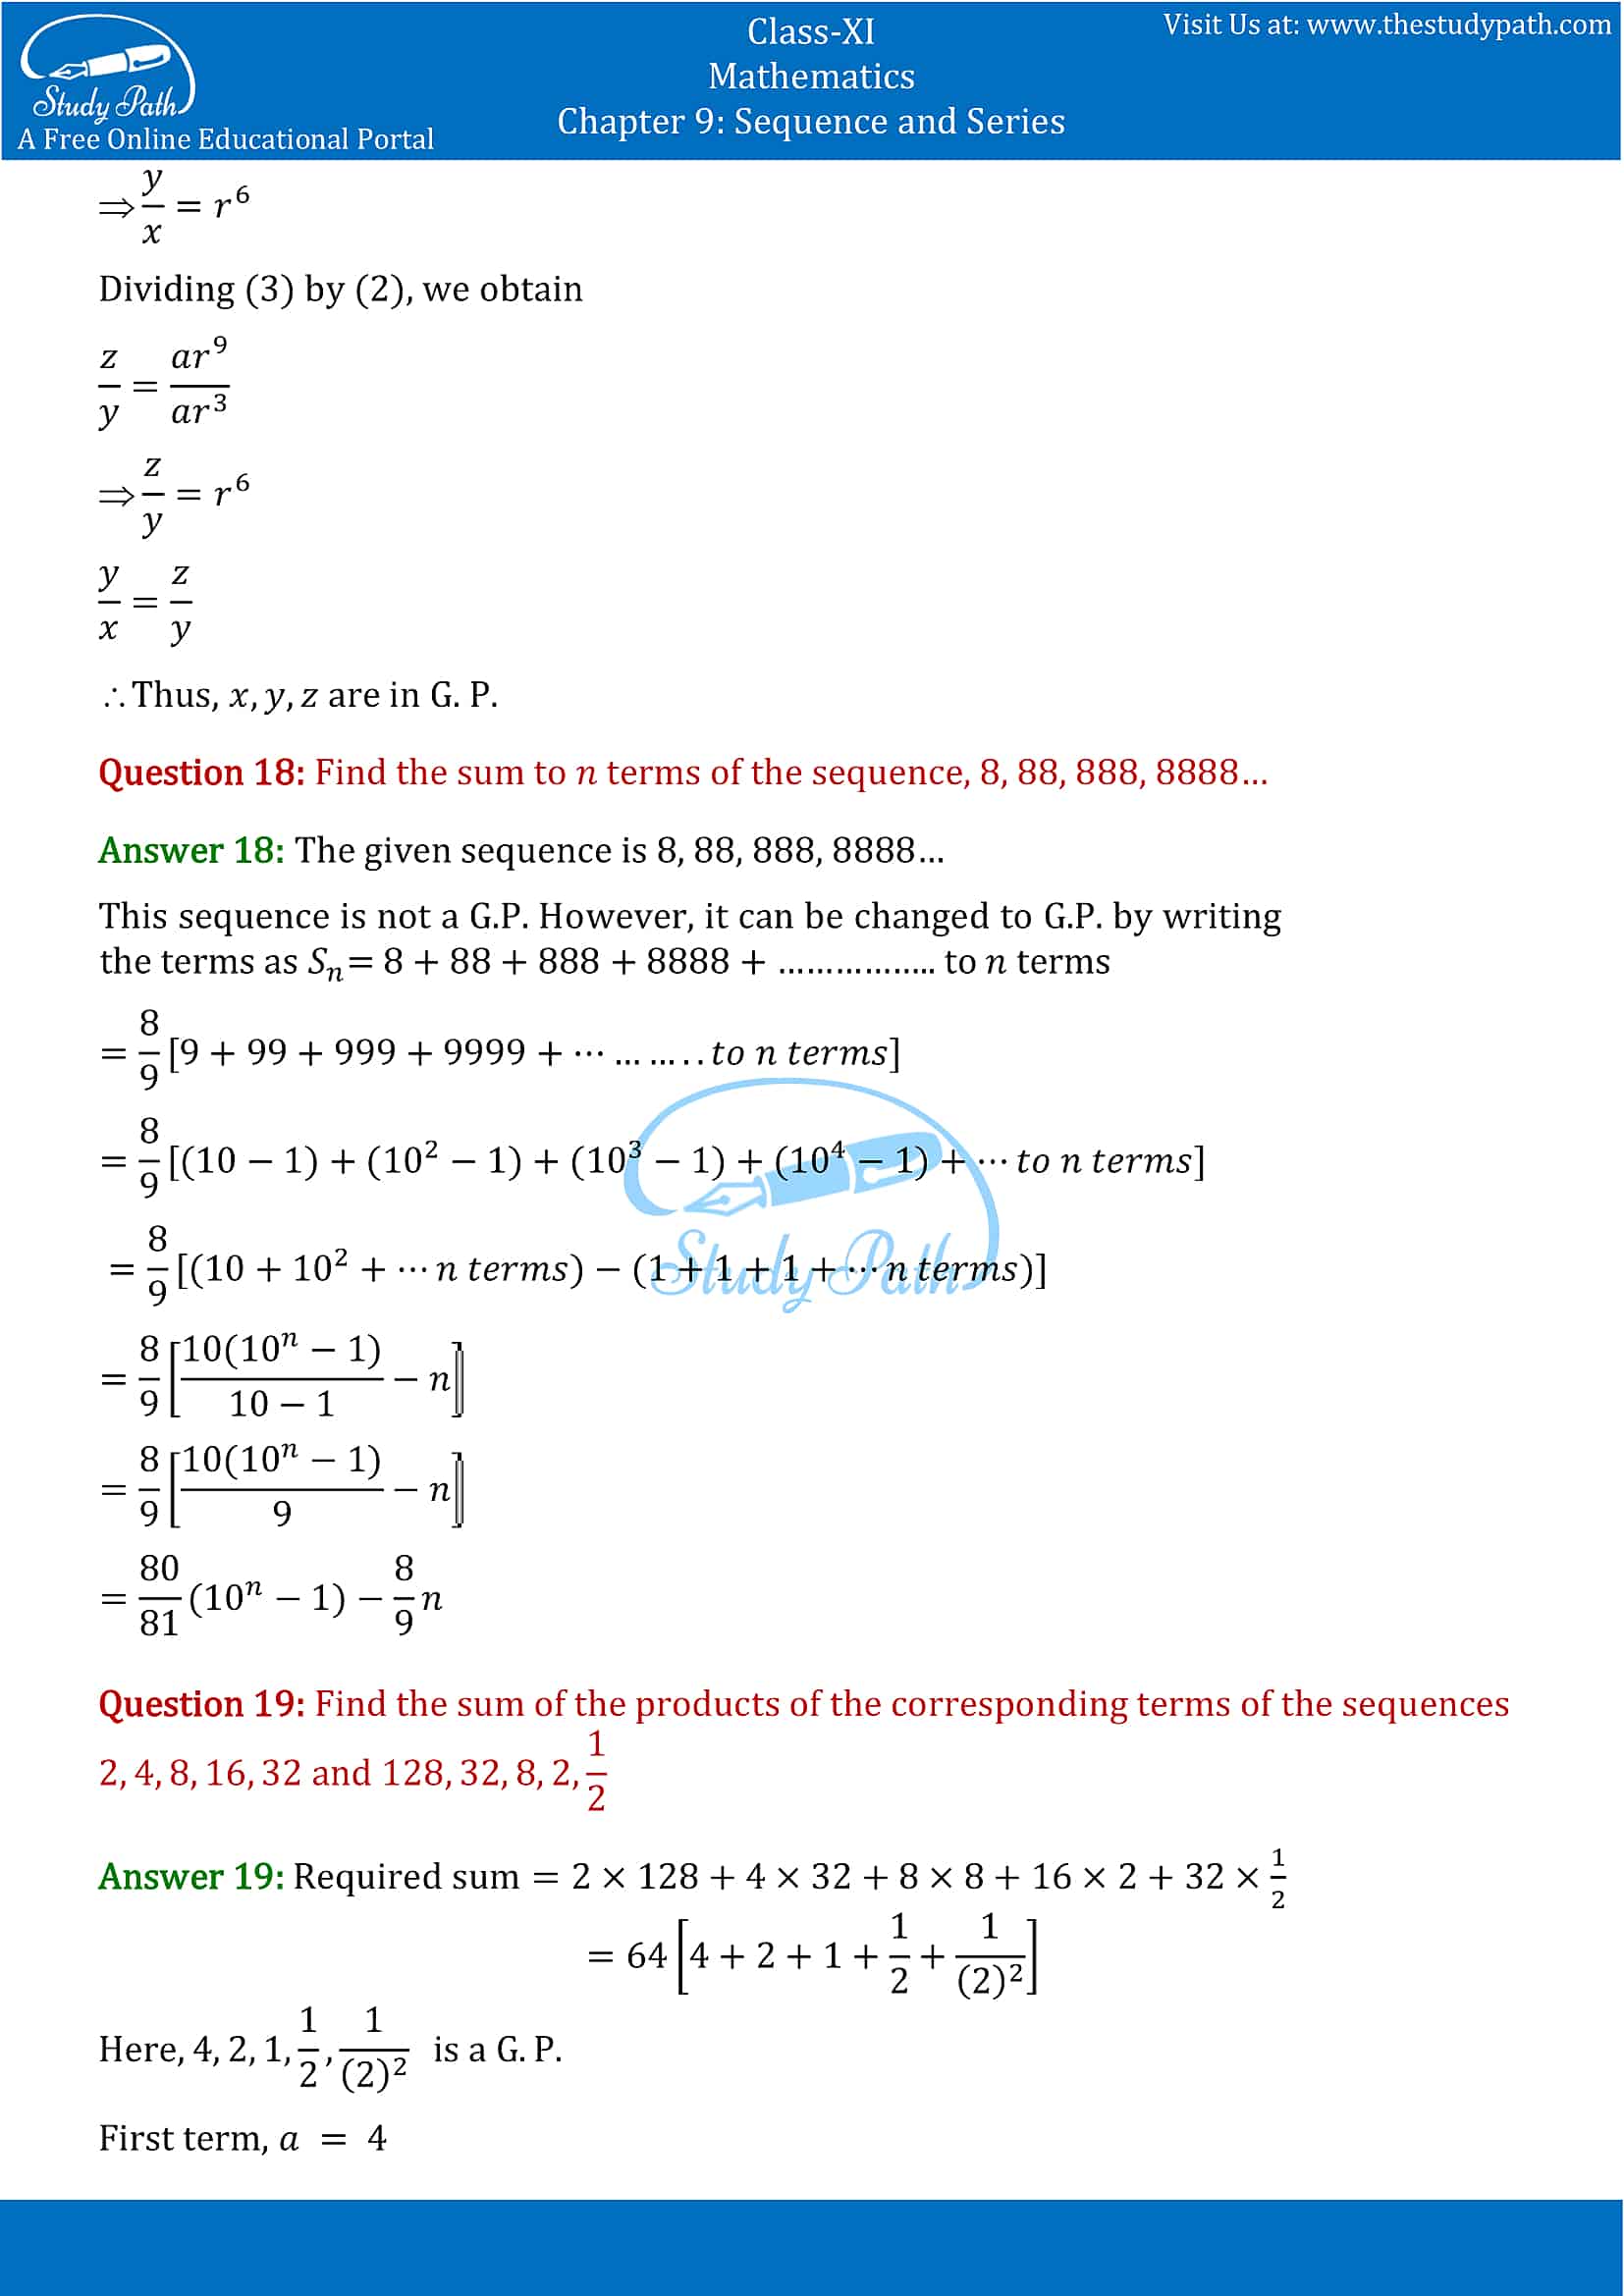 NCERT Solutions for Class 11 Maths chapter 9 Sequence and Series Exercise 9.3 Part-11